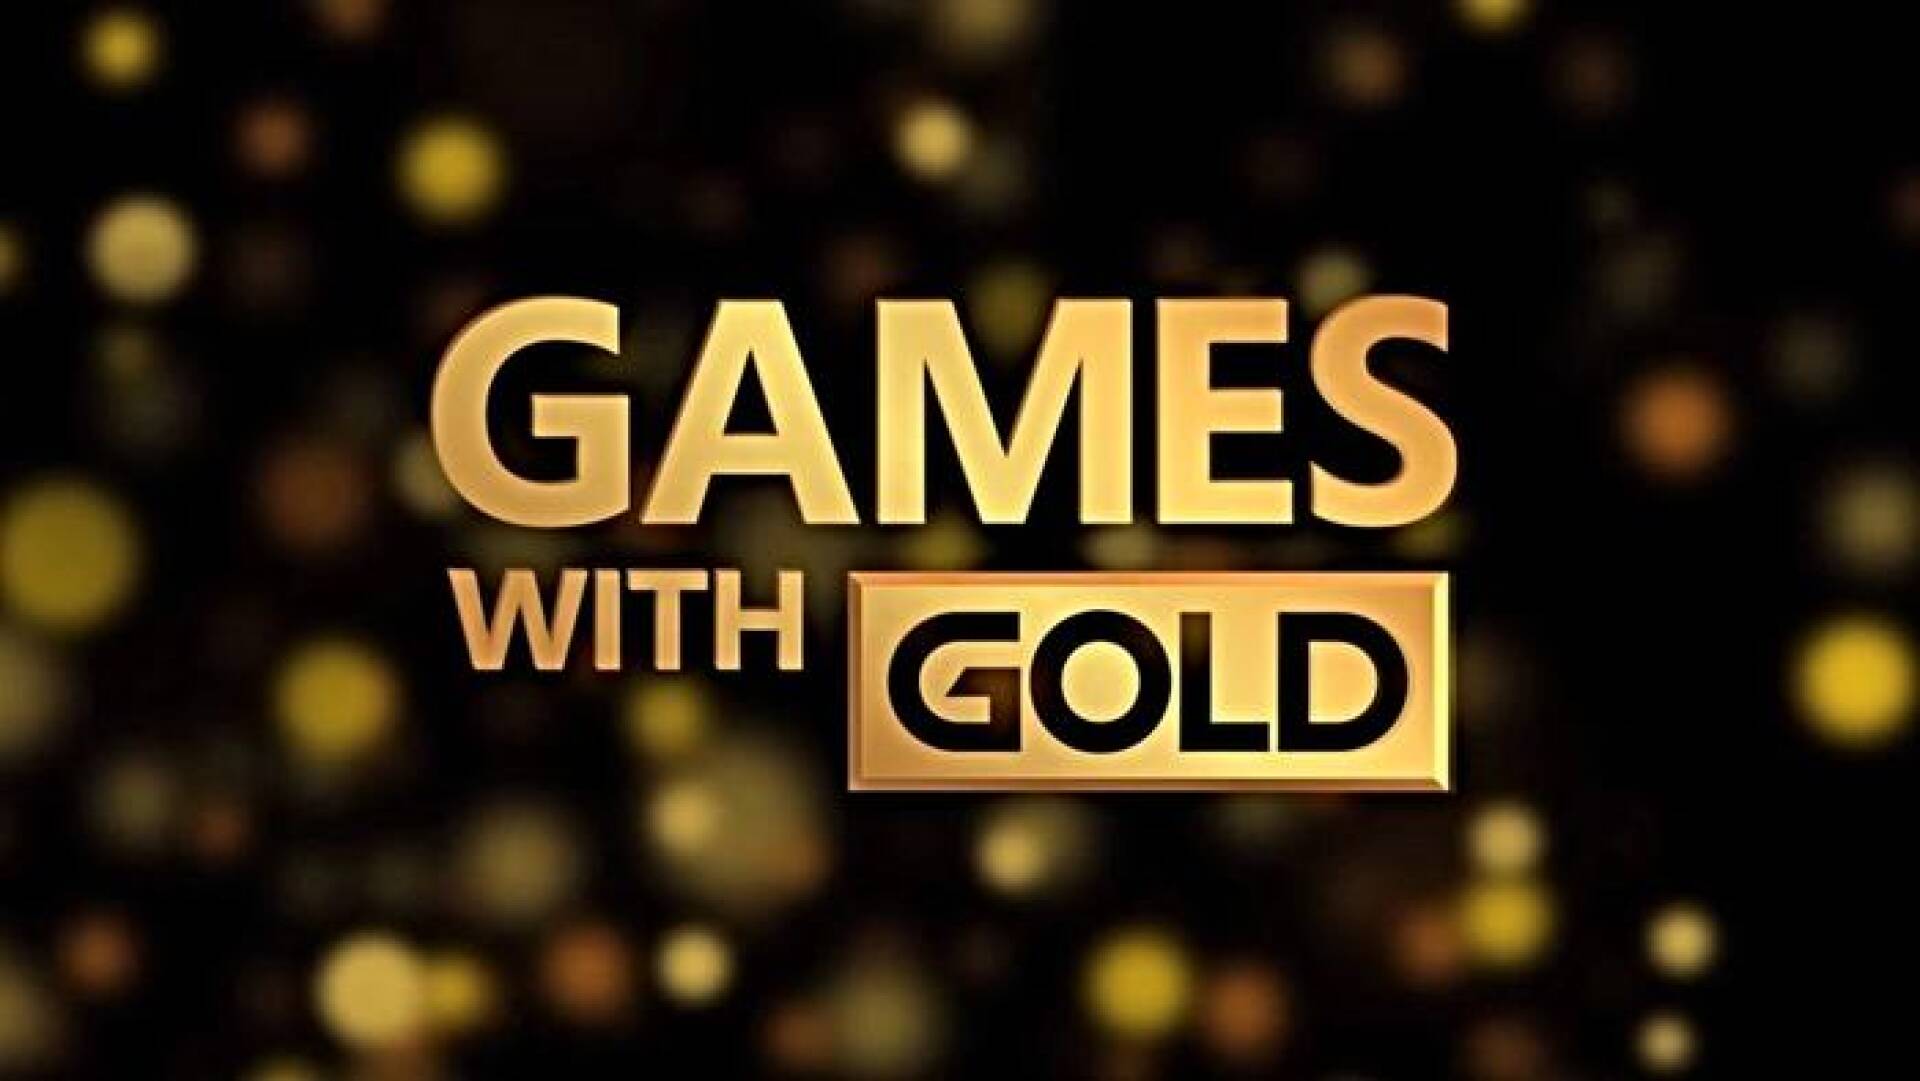 Games With Gold, July 2022 free games announced